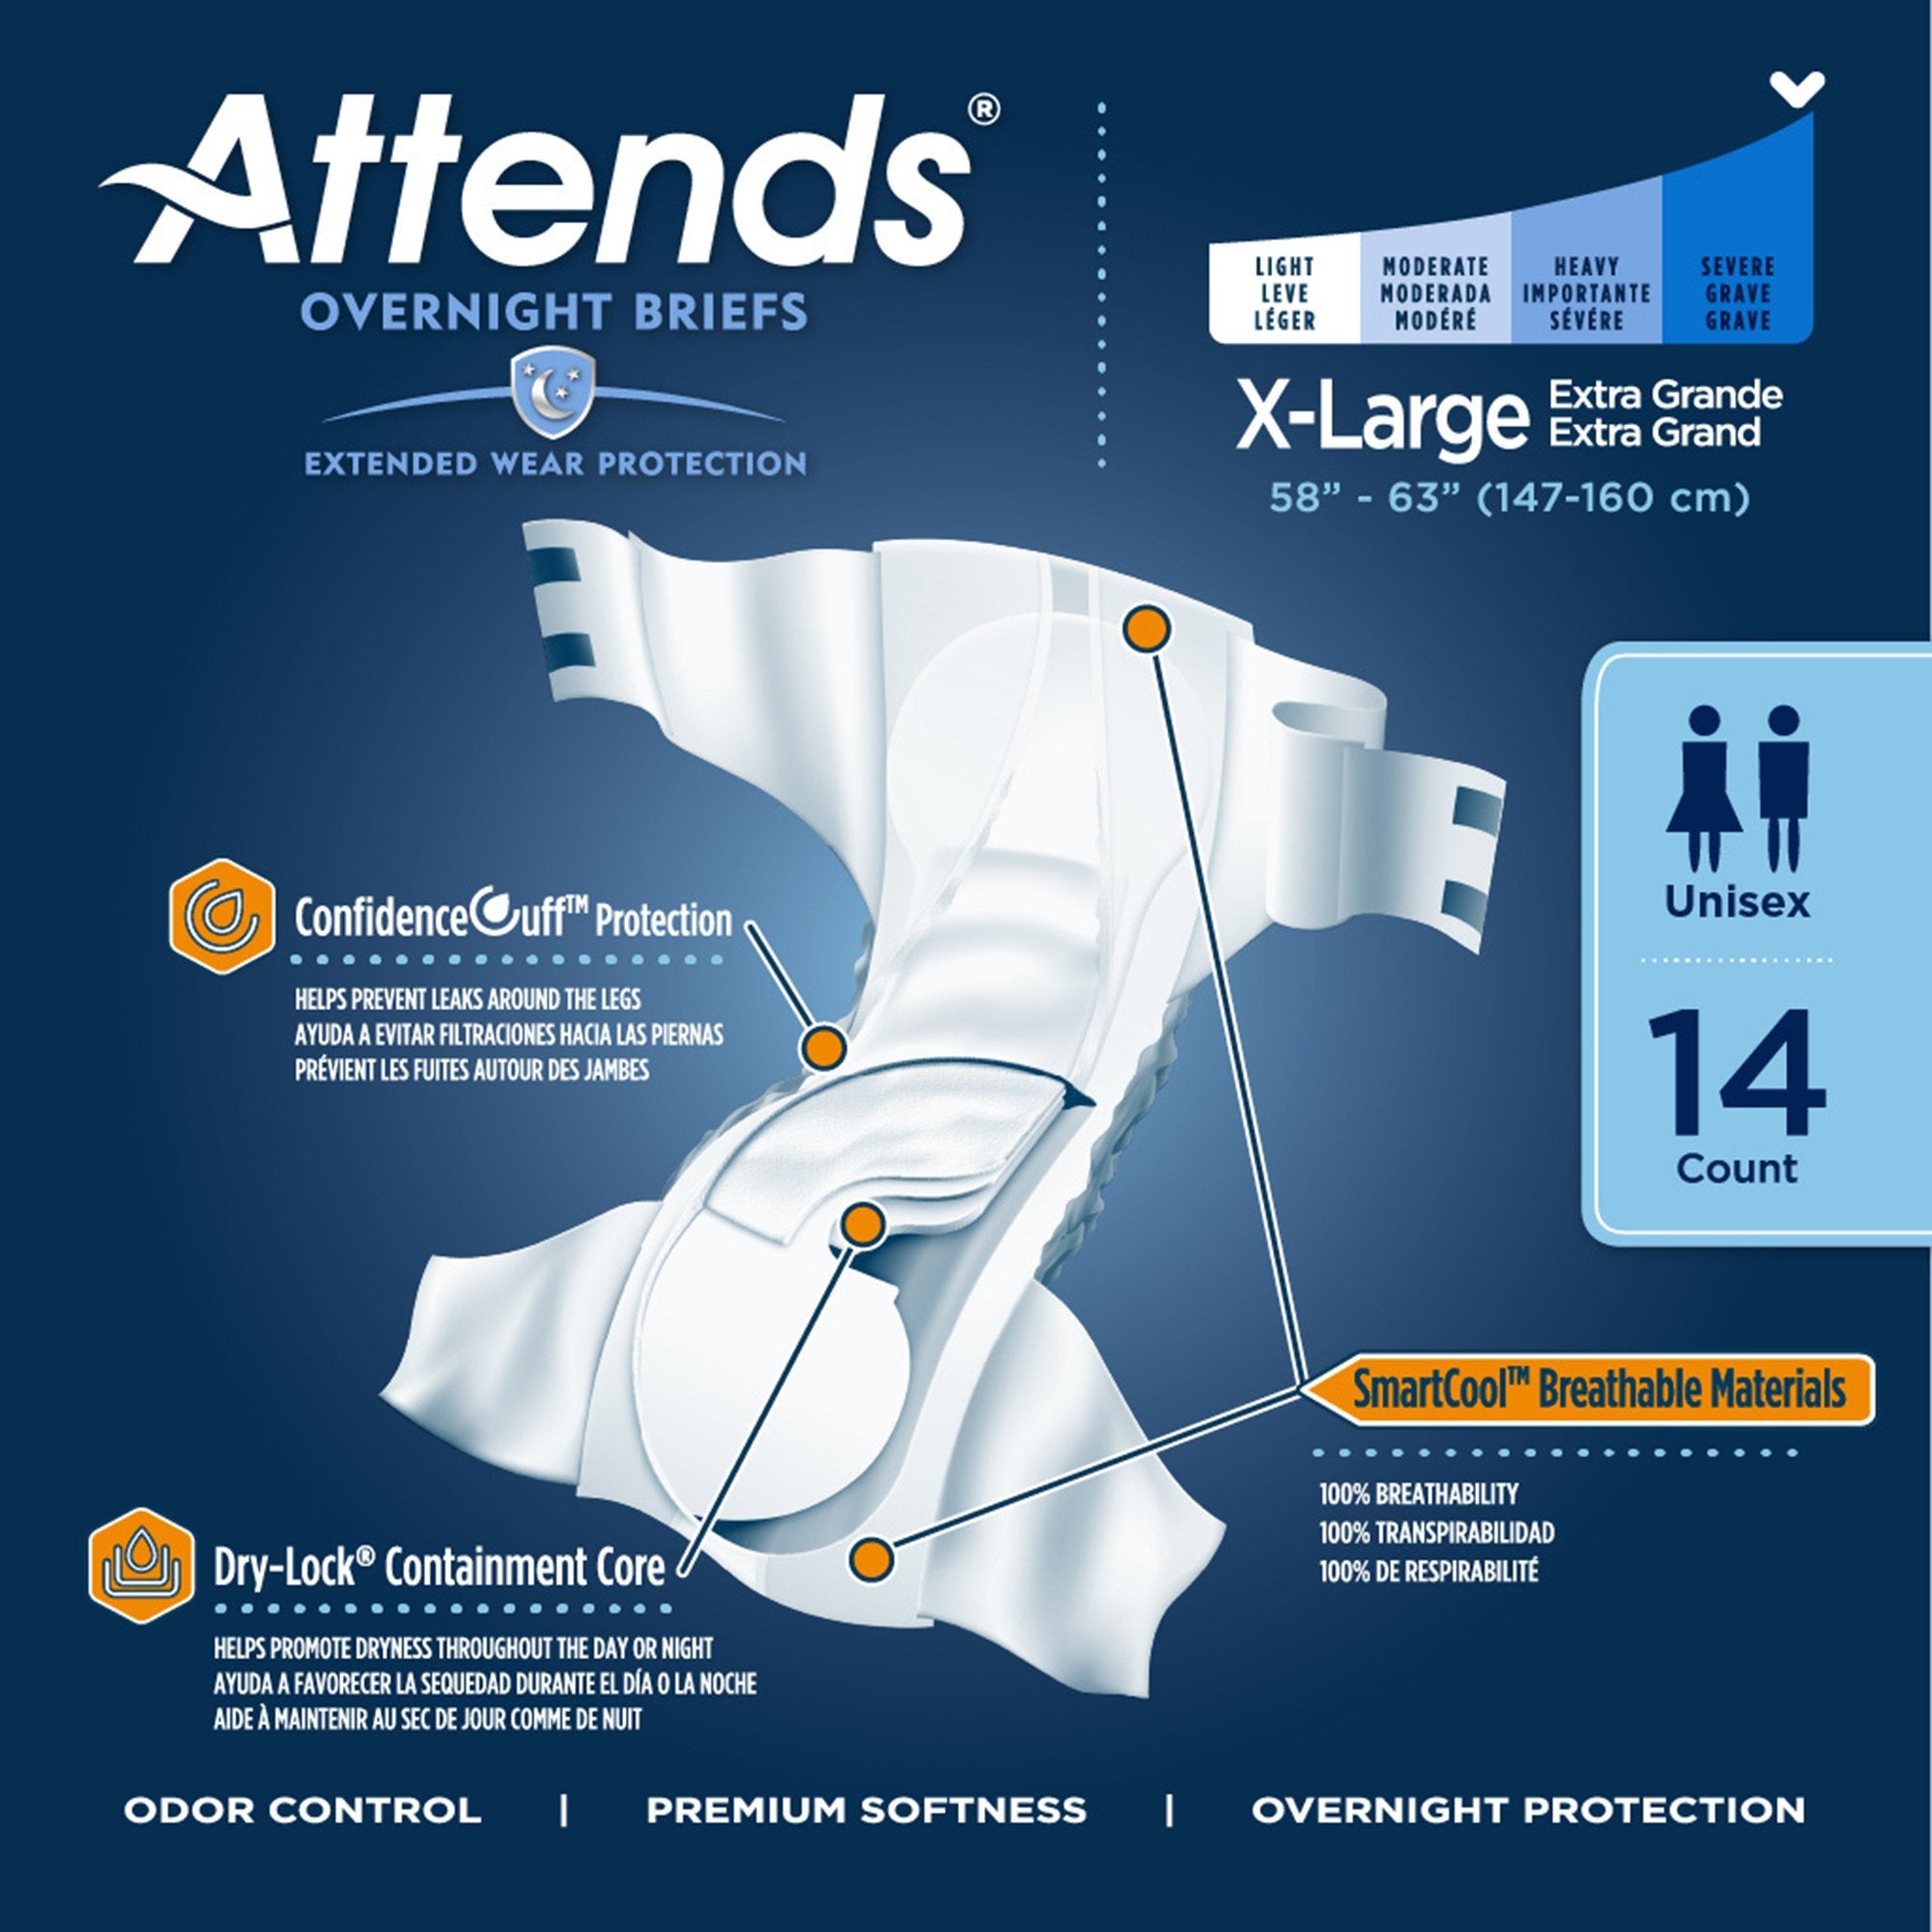 Unisex Adult Incontinence Brief Attends® Overnight X-Large Disposable Heavy Absorbency